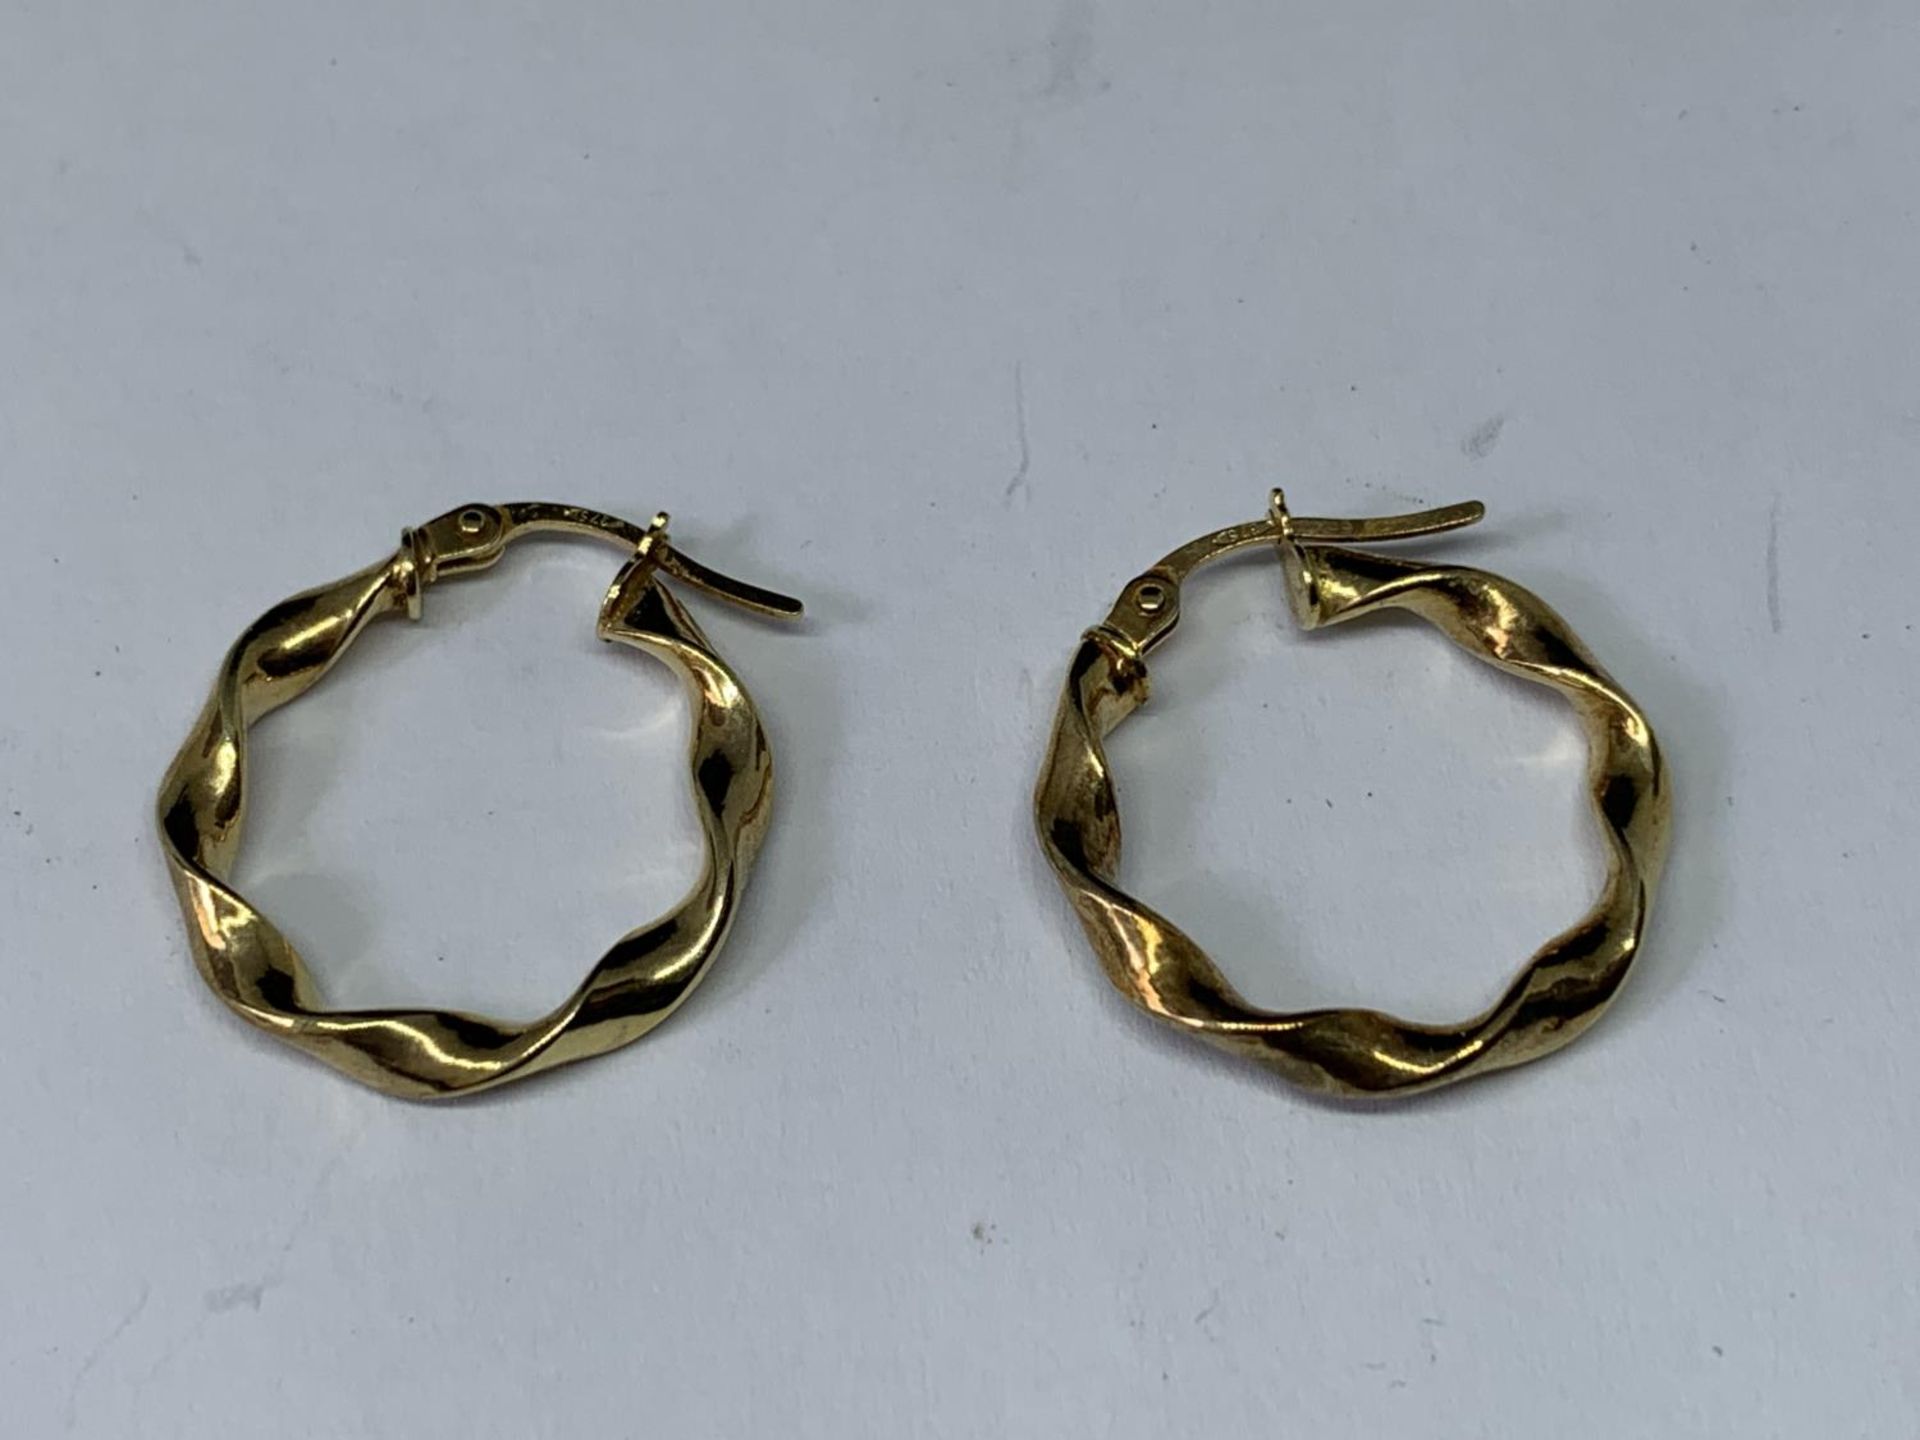 A PAIR OF MARKED 375 GOLD TWIST EARRINGS - Image 2 of 4